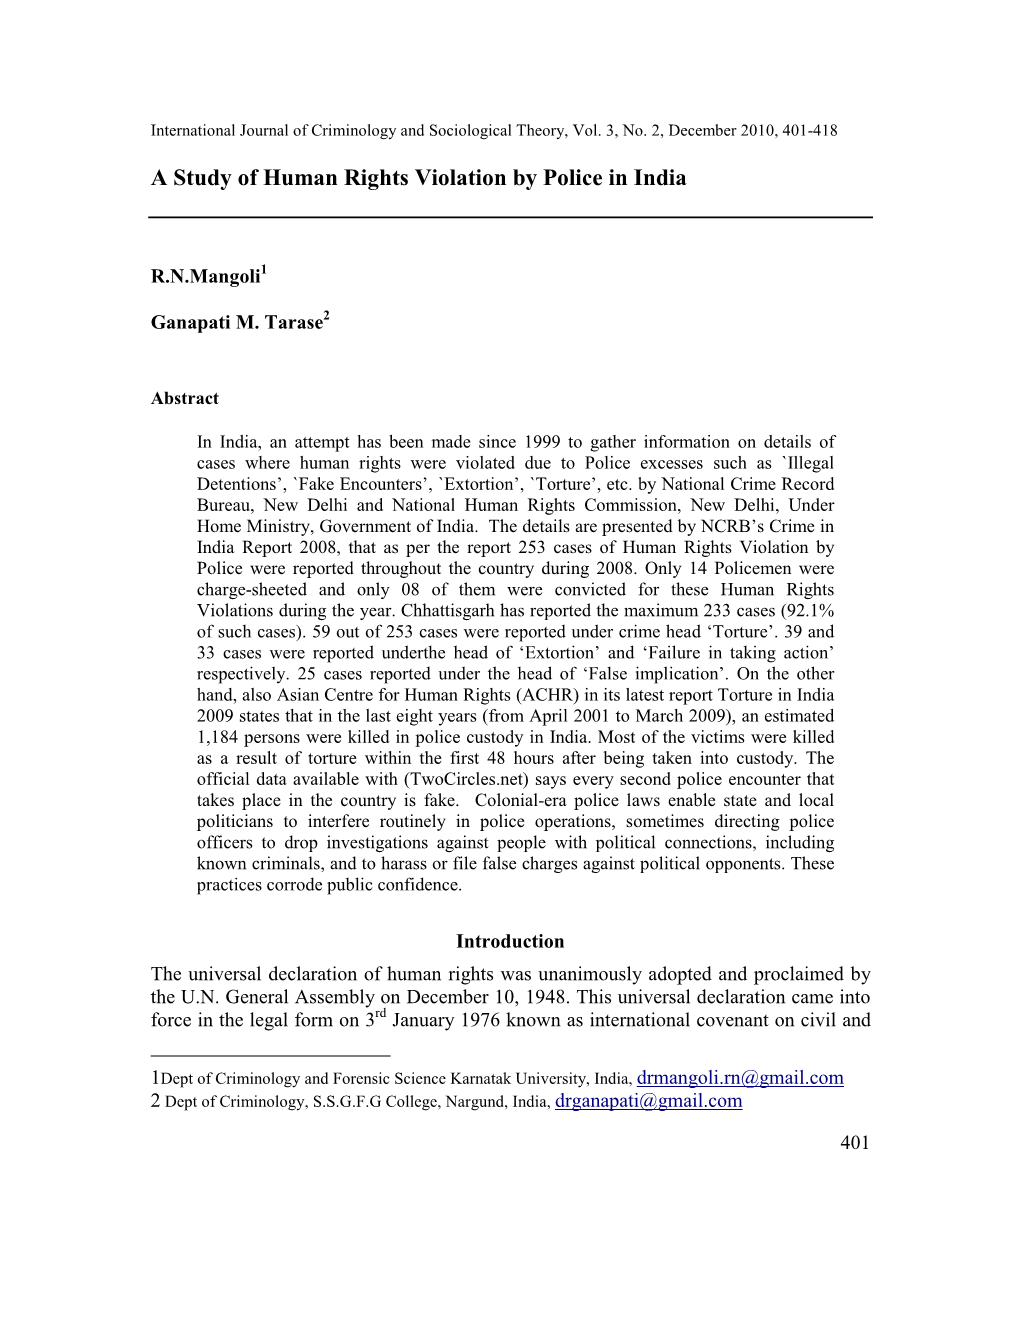 A Study of Human Rights Violation by Police in India